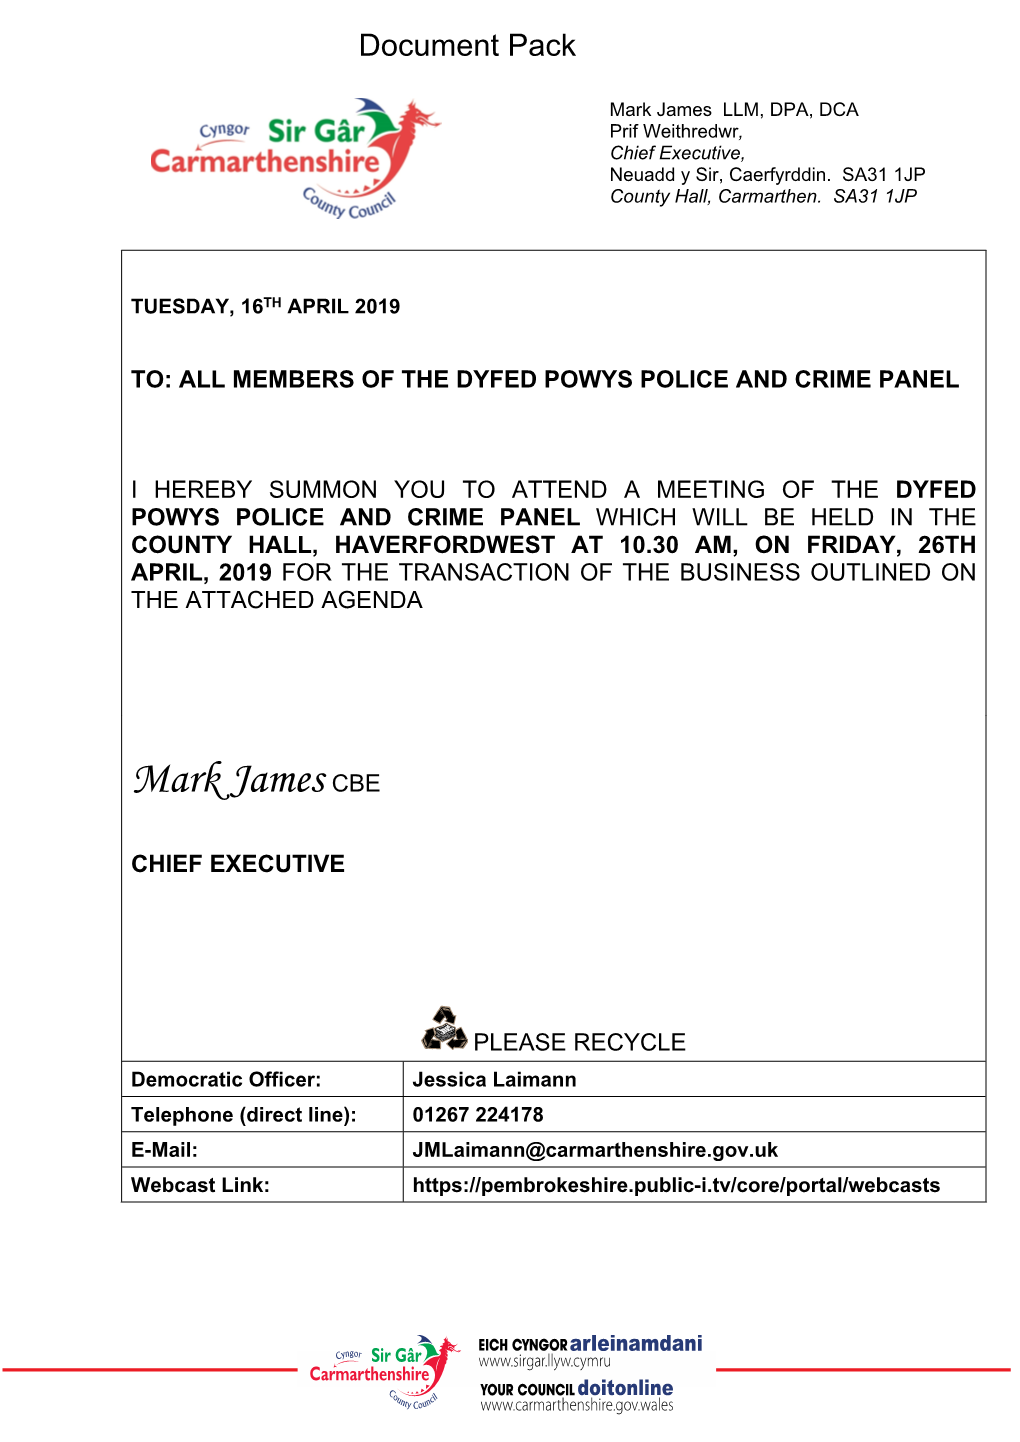 Agenda Document for Dyfed Powys Police and Crime Panel, 26/04